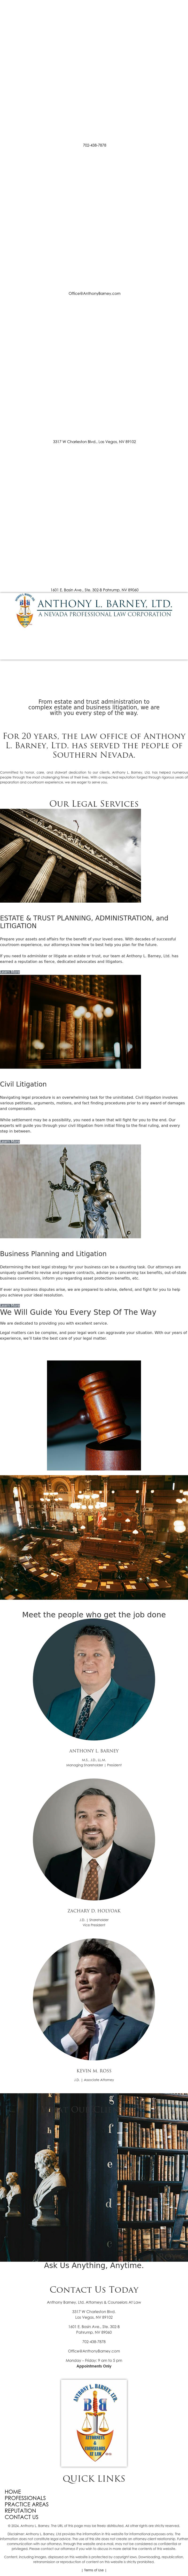 Anthony Barney, Ltd. Attorneys & Counselors at Law - Las Vegas NV Lawyers